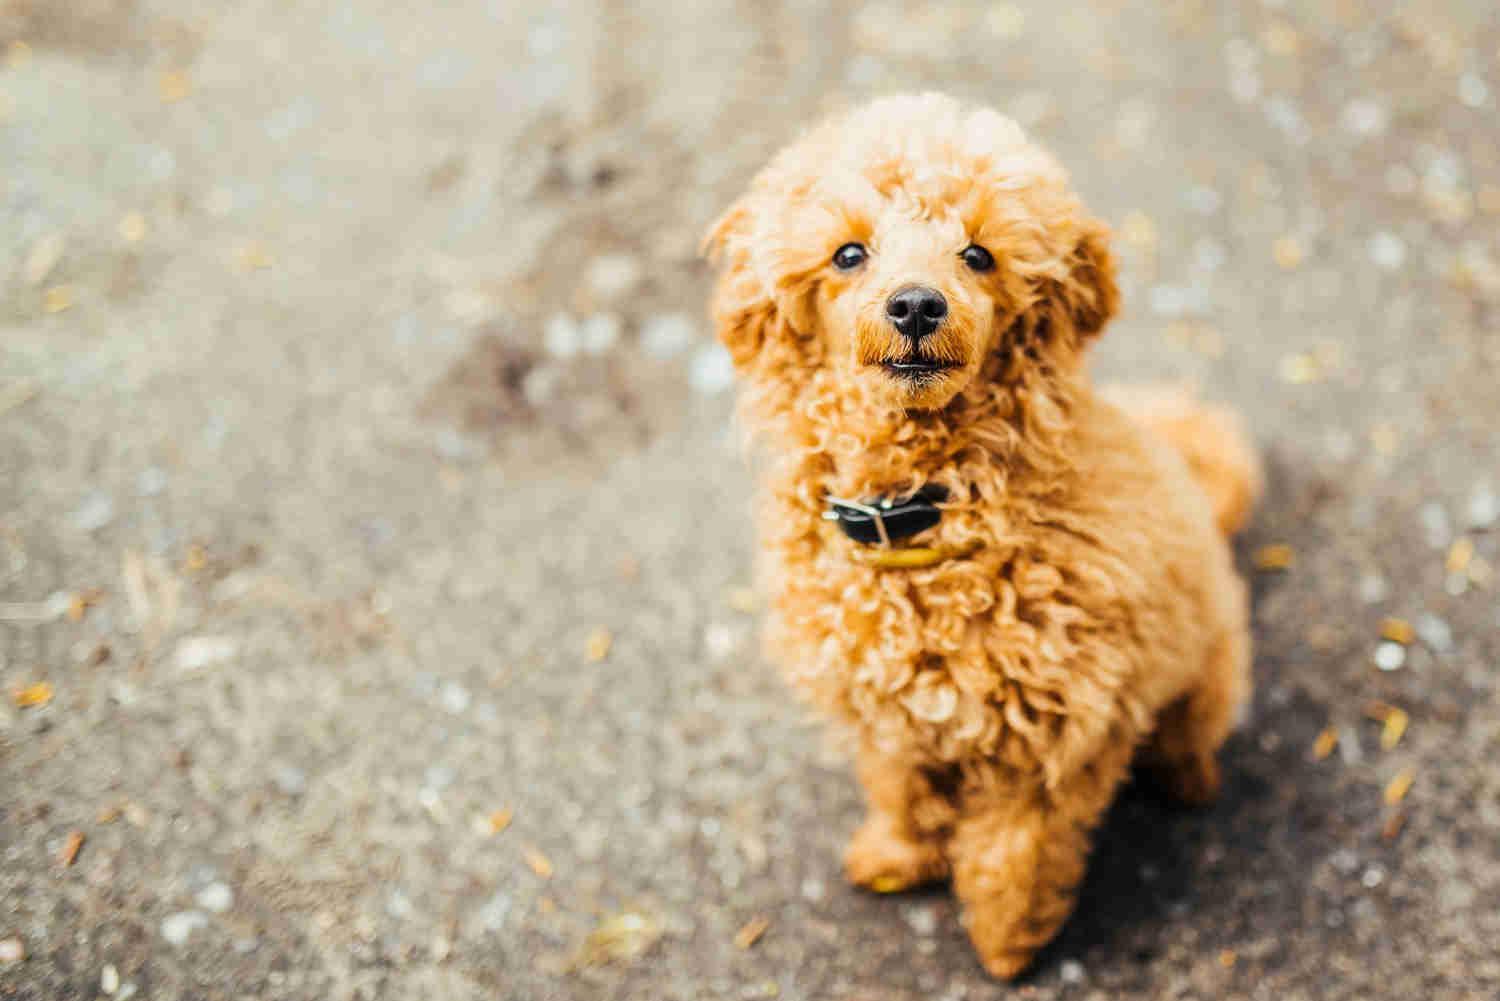 How did you handle any instances of resource guarding or possessive behavior in your Poodle puppy?